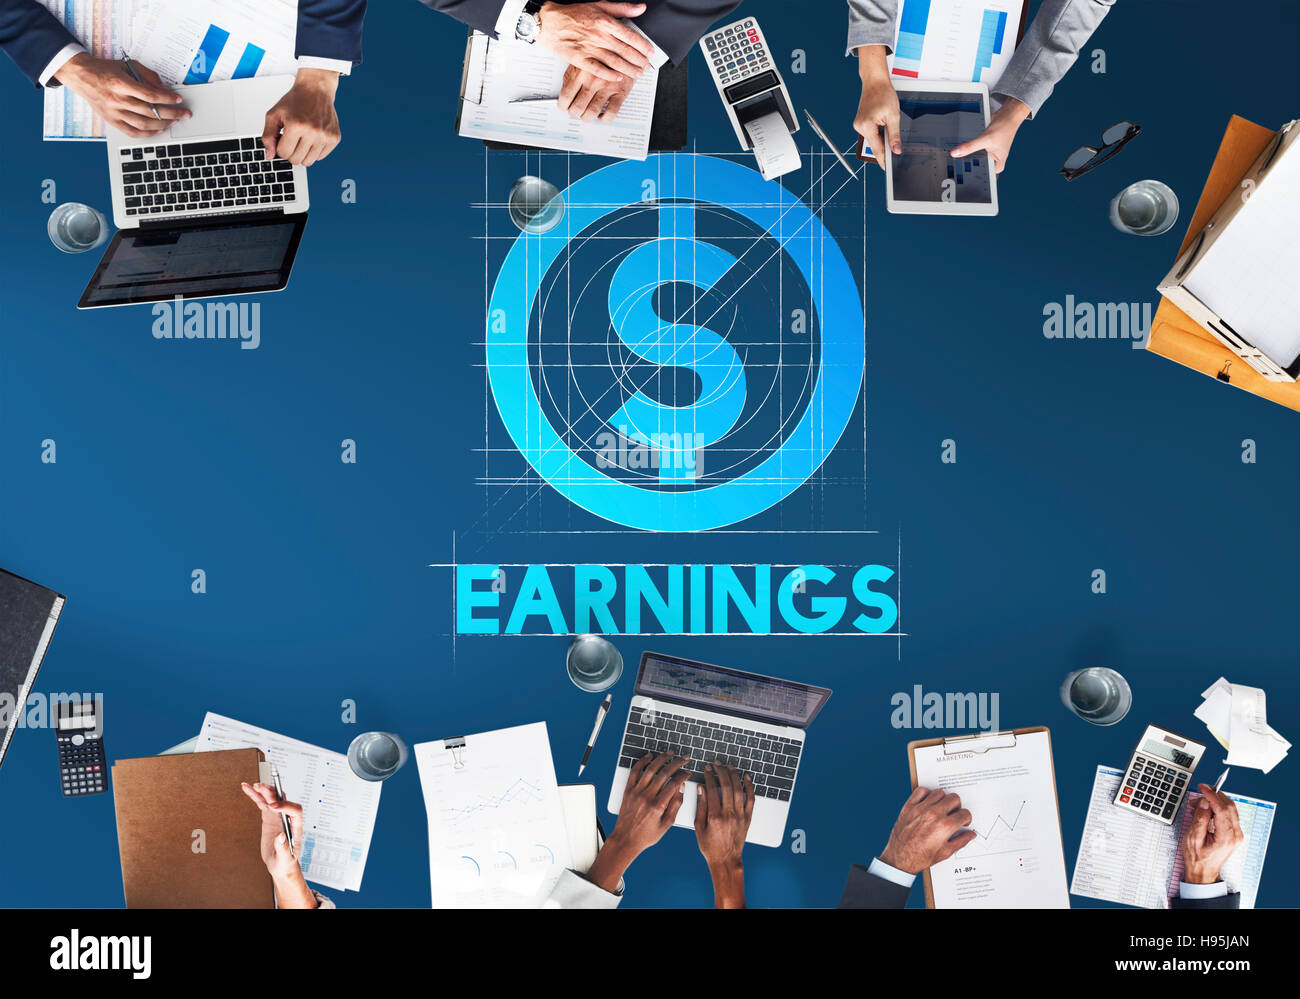 Earnings Finance Money Technology Graphic Concept Stock Photo